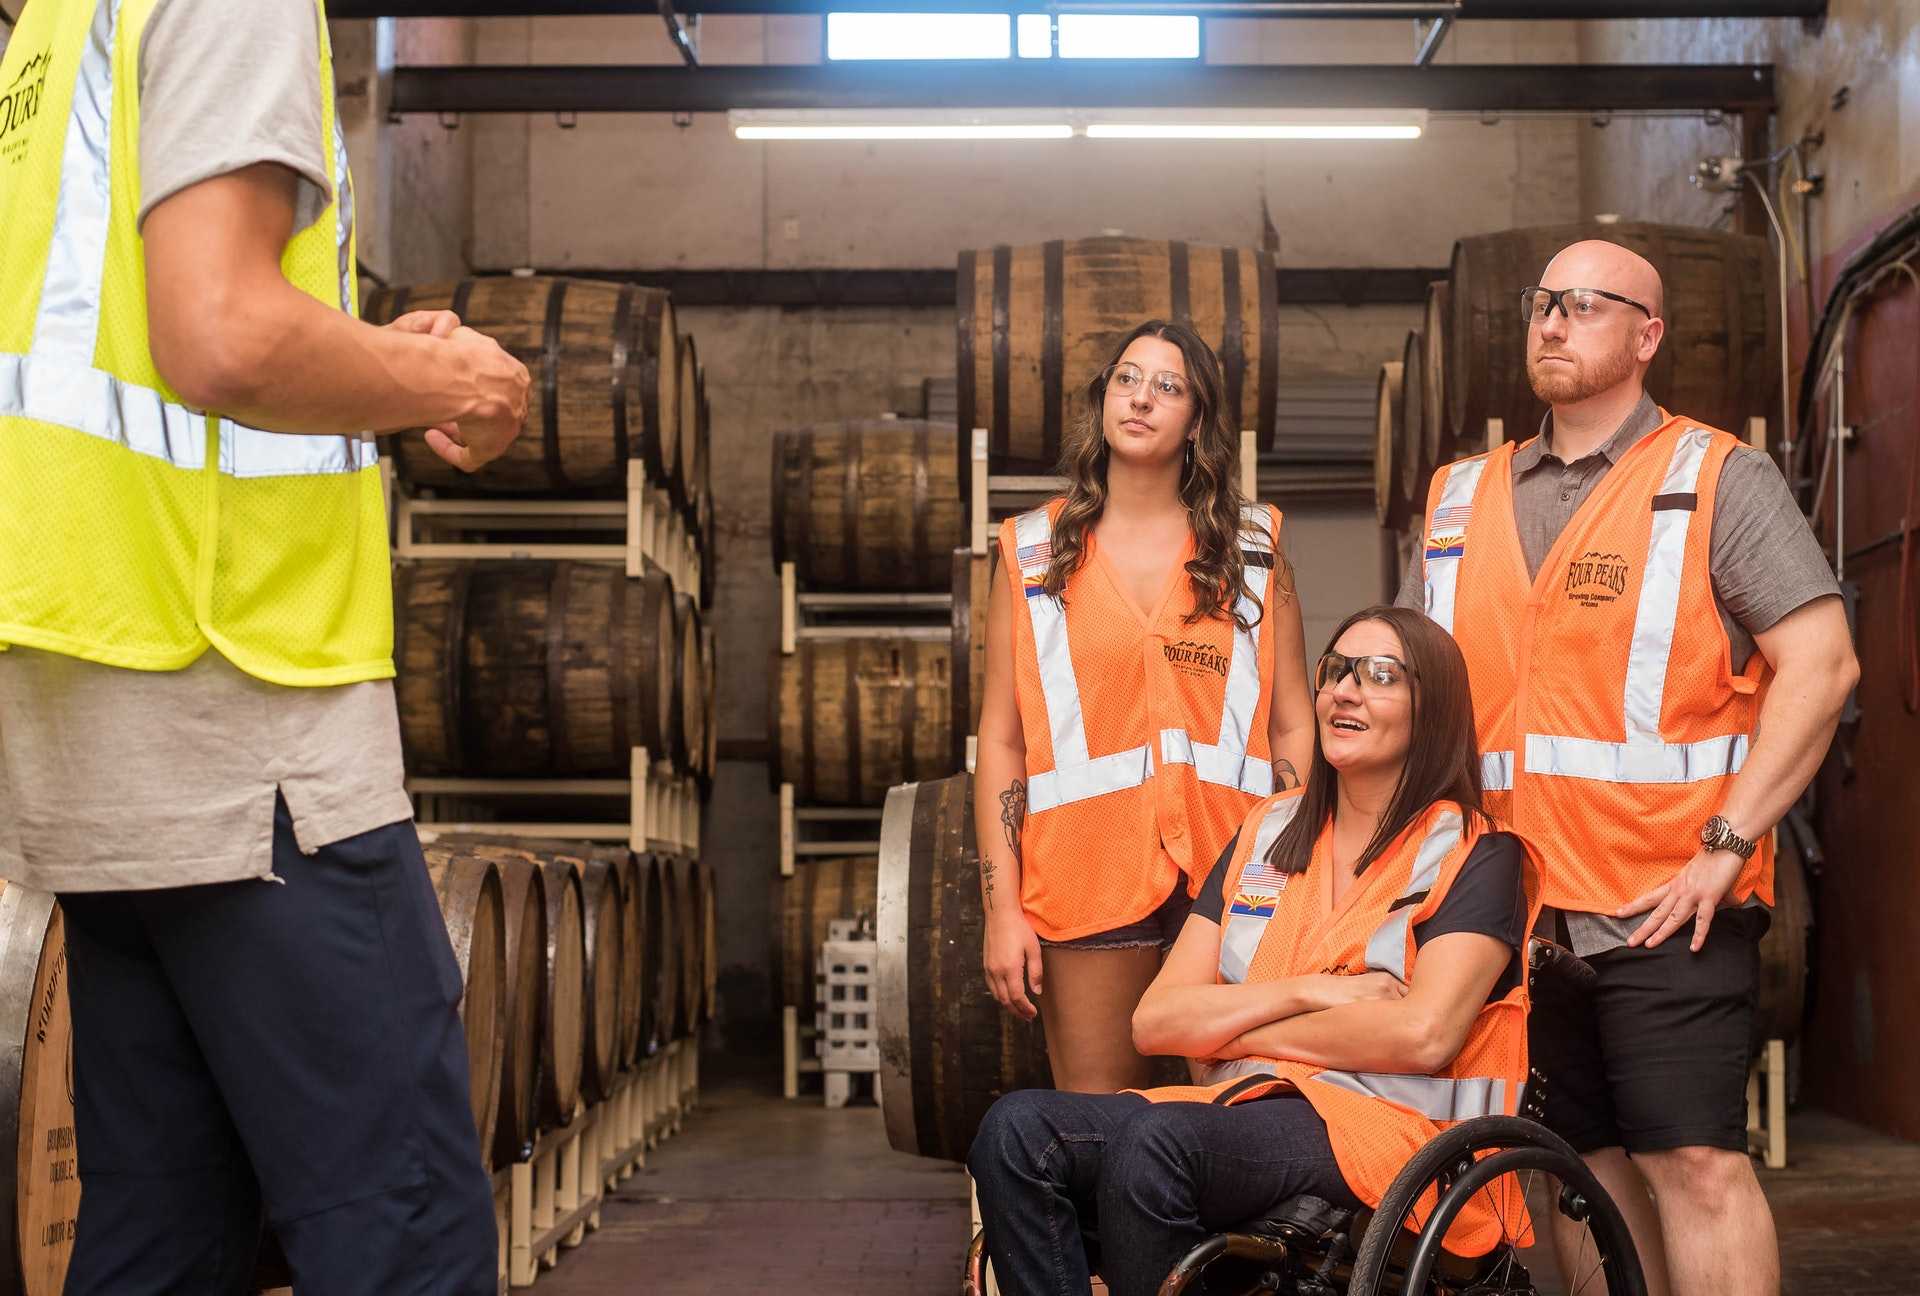 An individual dressed in a yellow vest is speaking a to group dressed in orange vests, including one in a wheelchair in a brewery